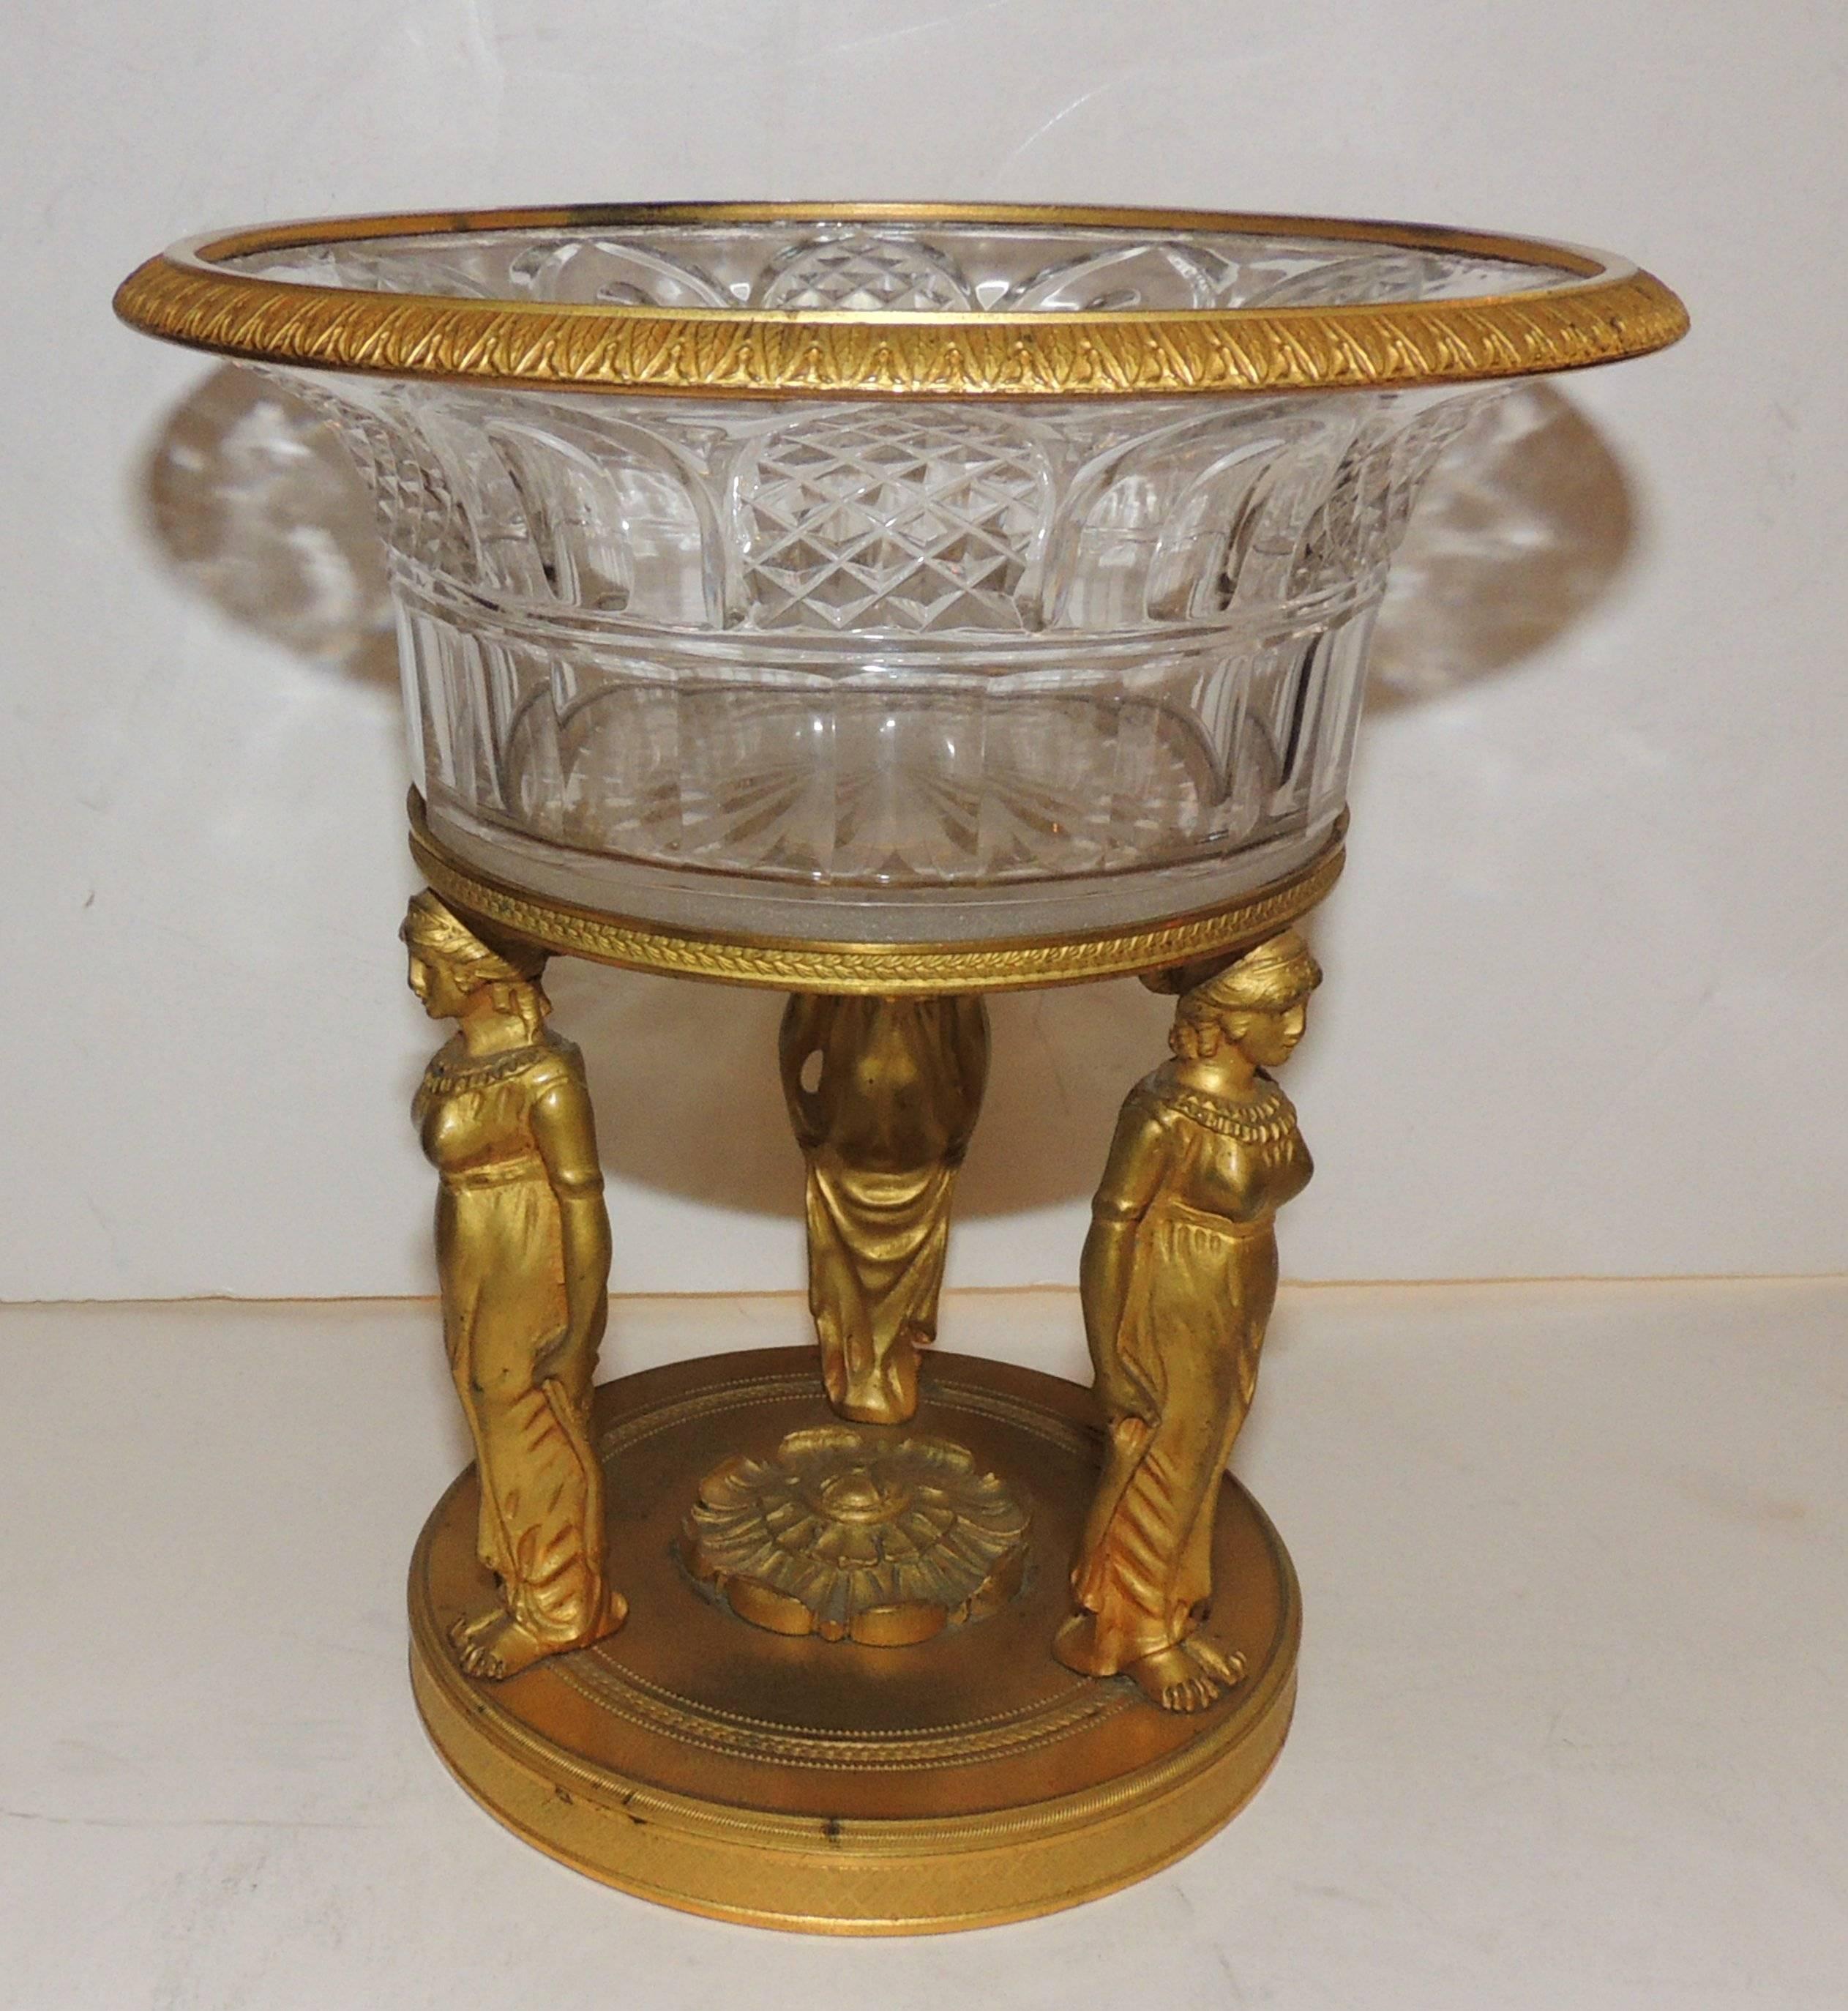 Beveled Wonderful French Empire Dore Bronze Cut Crystal Figural Neoclassical Centrepiece For Sale